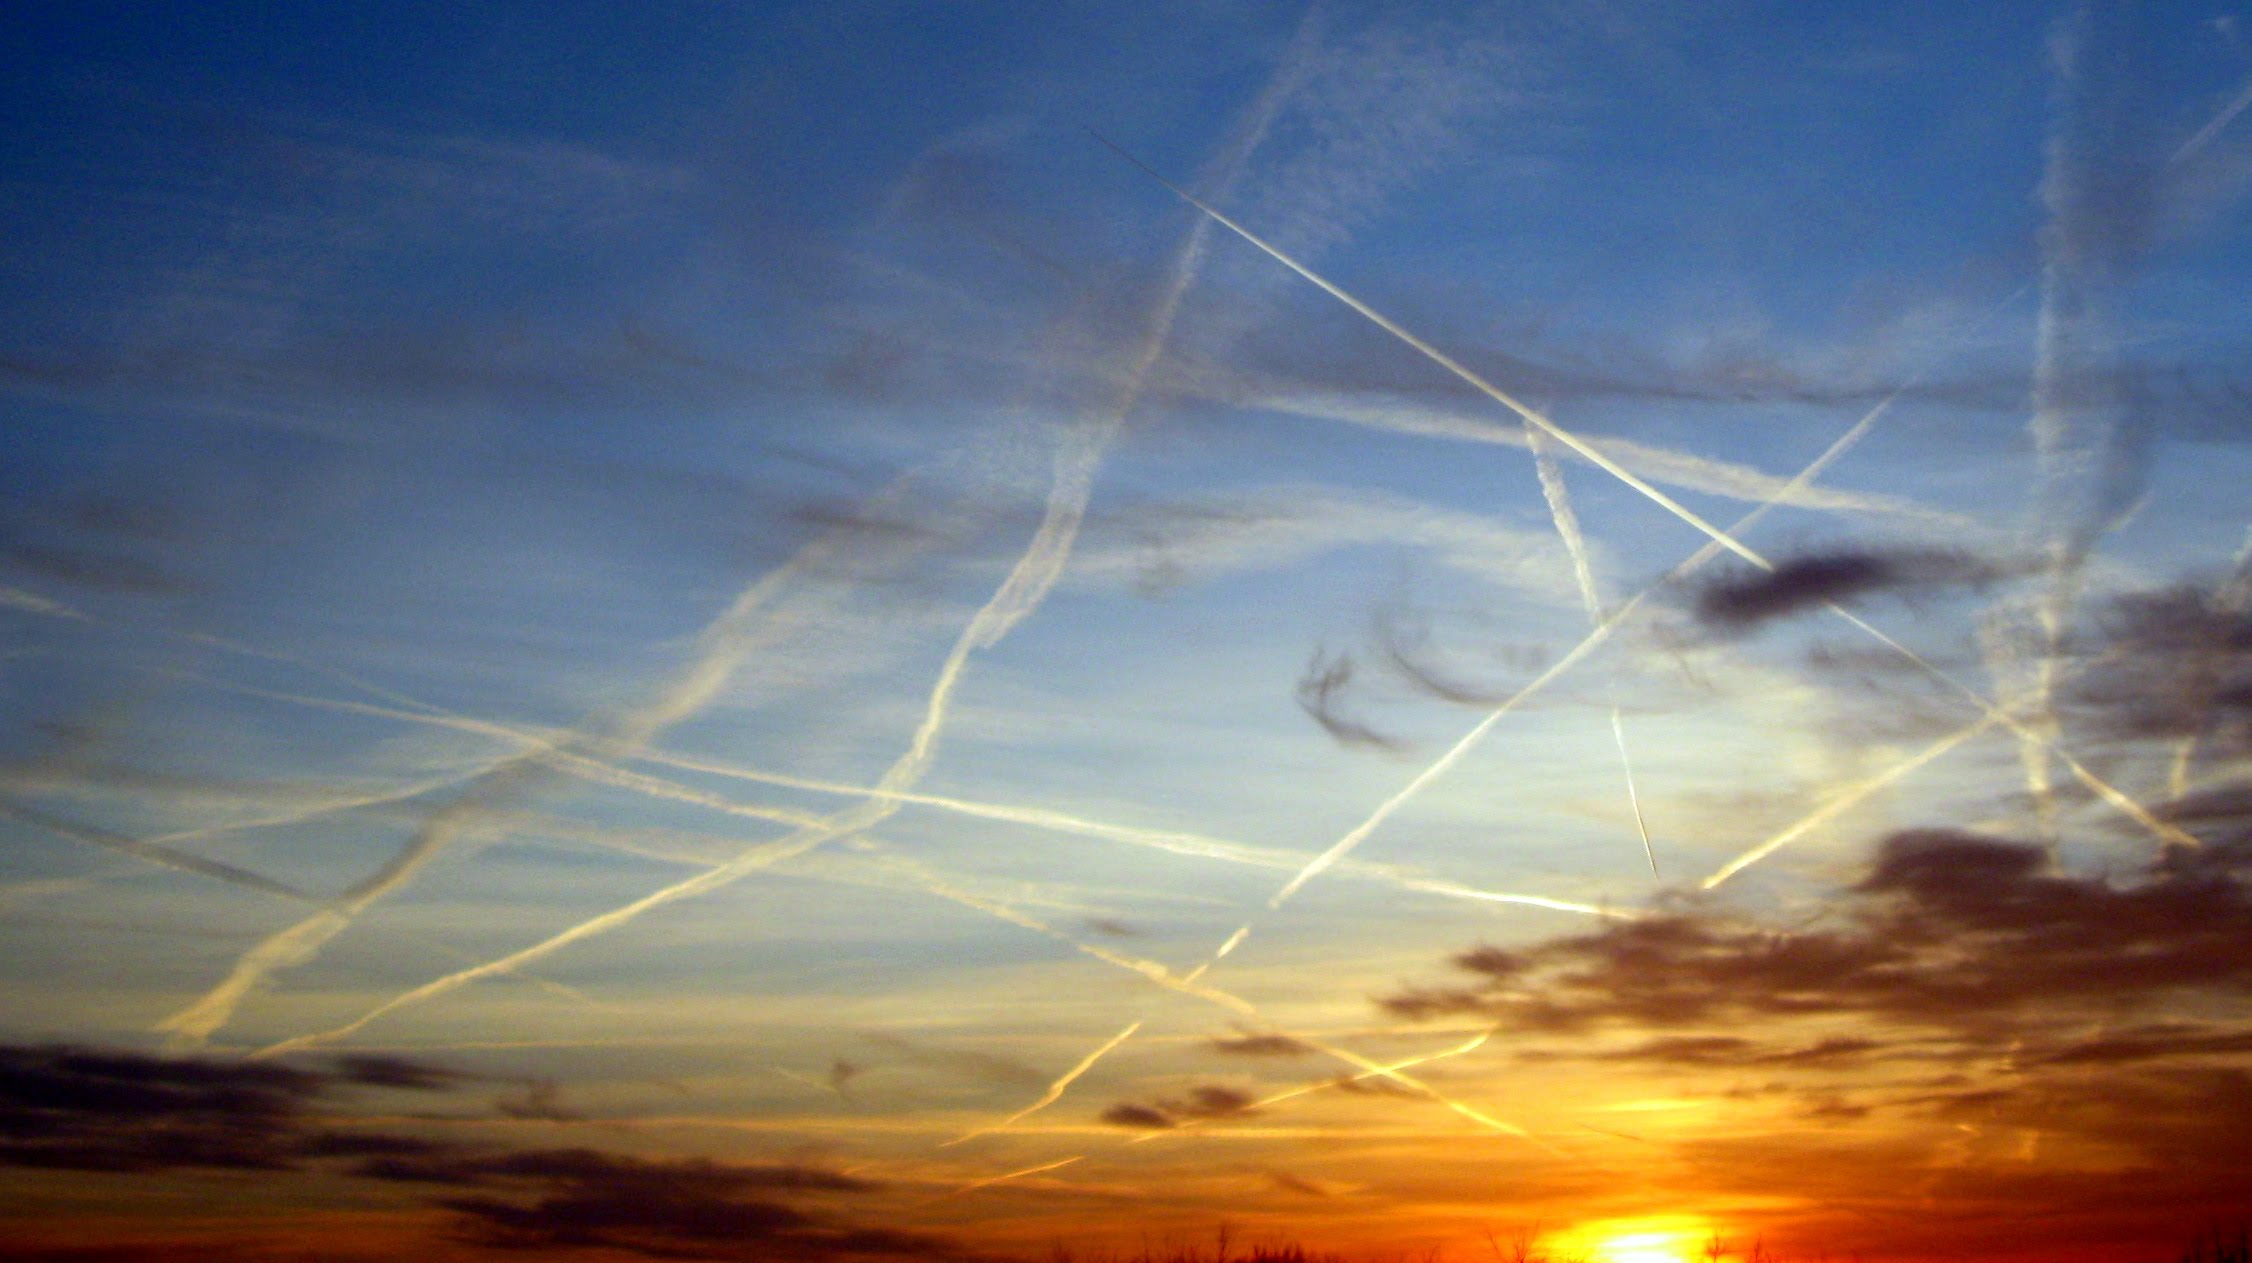 Top 10 natural supplements and herbs that can fight the toxicities emitted by chemtrails